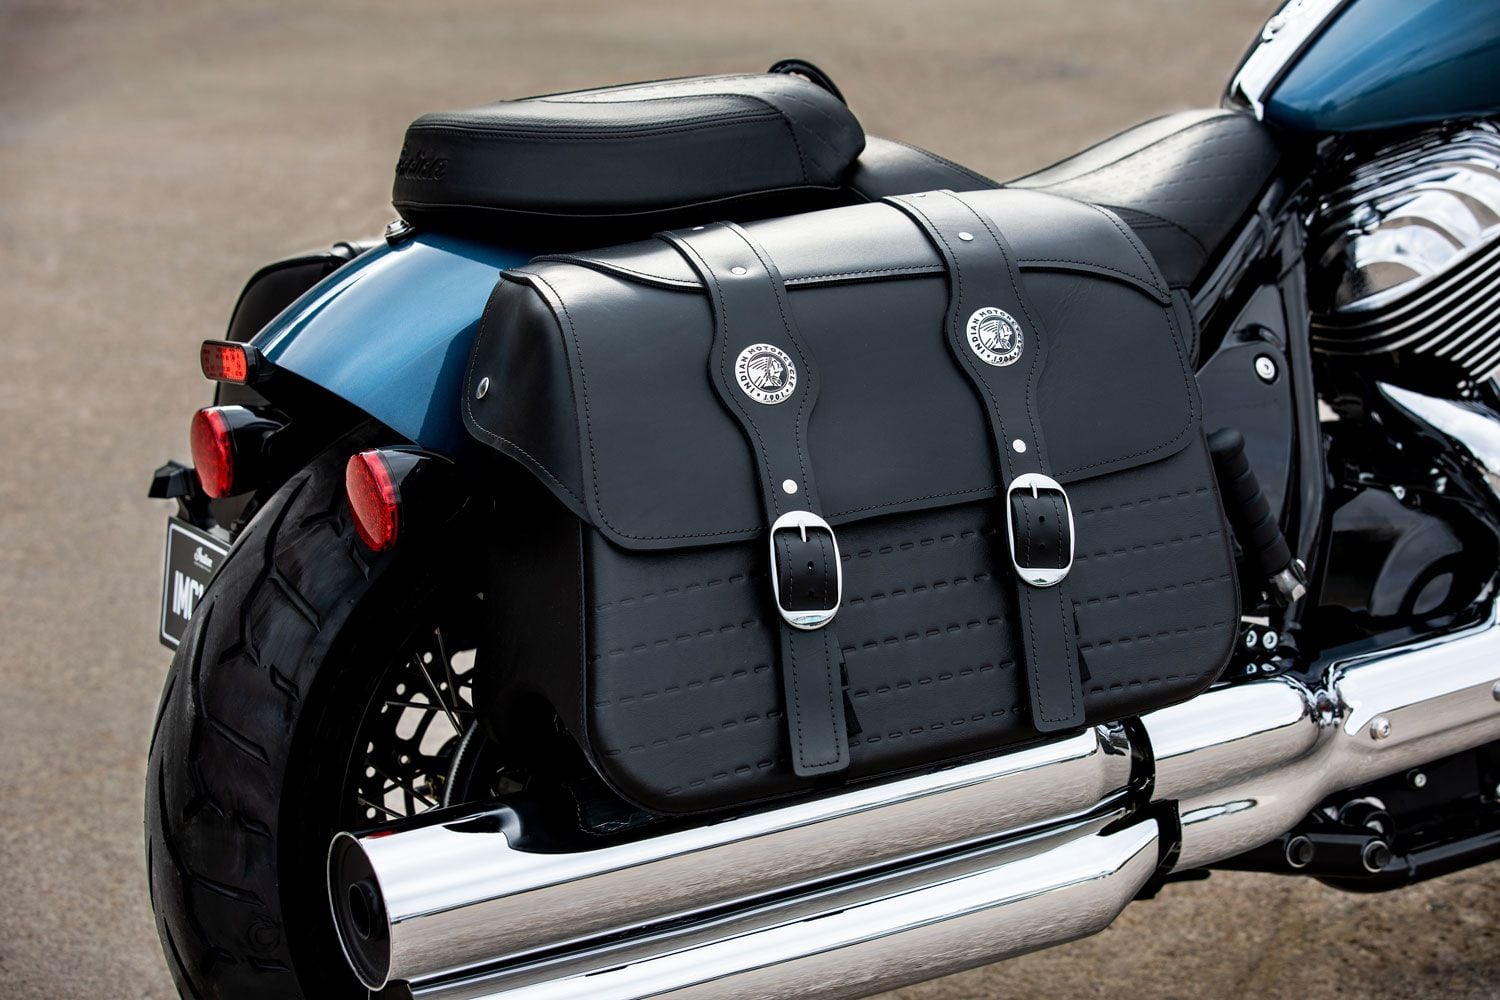 The Super Chief comes with leather saddlebags standard, but Indian has rolled out more aftermarket cargo options as well.